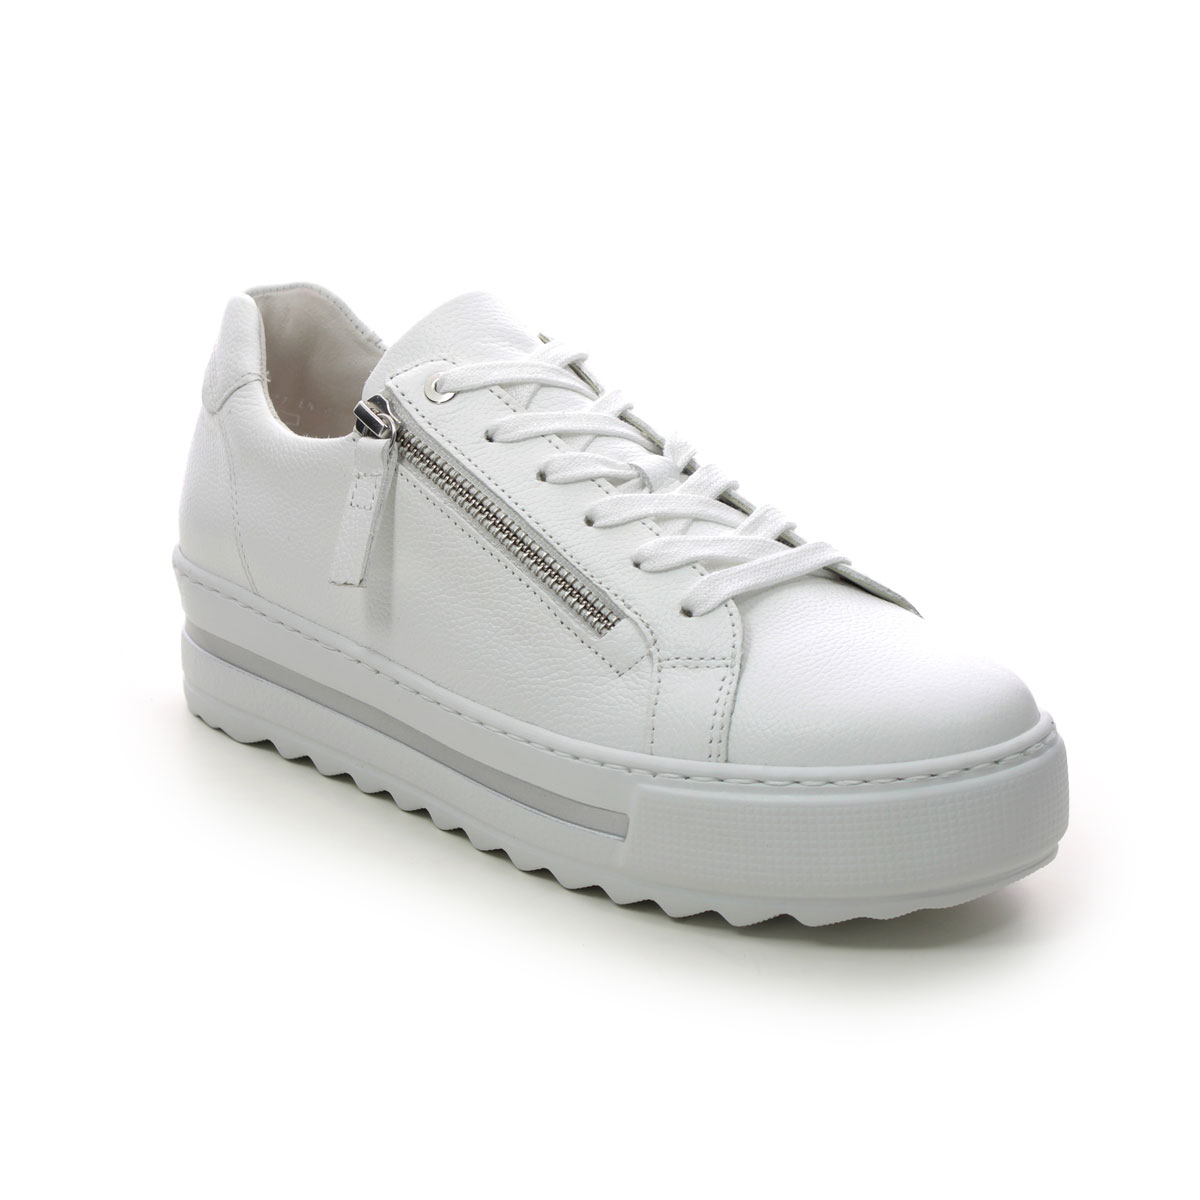 Gabor Heather White Leather Womens Trainers 26.498.50 In Size 6.5 In Plain White Leather  Womens Trainers In Soft White Leather Leather